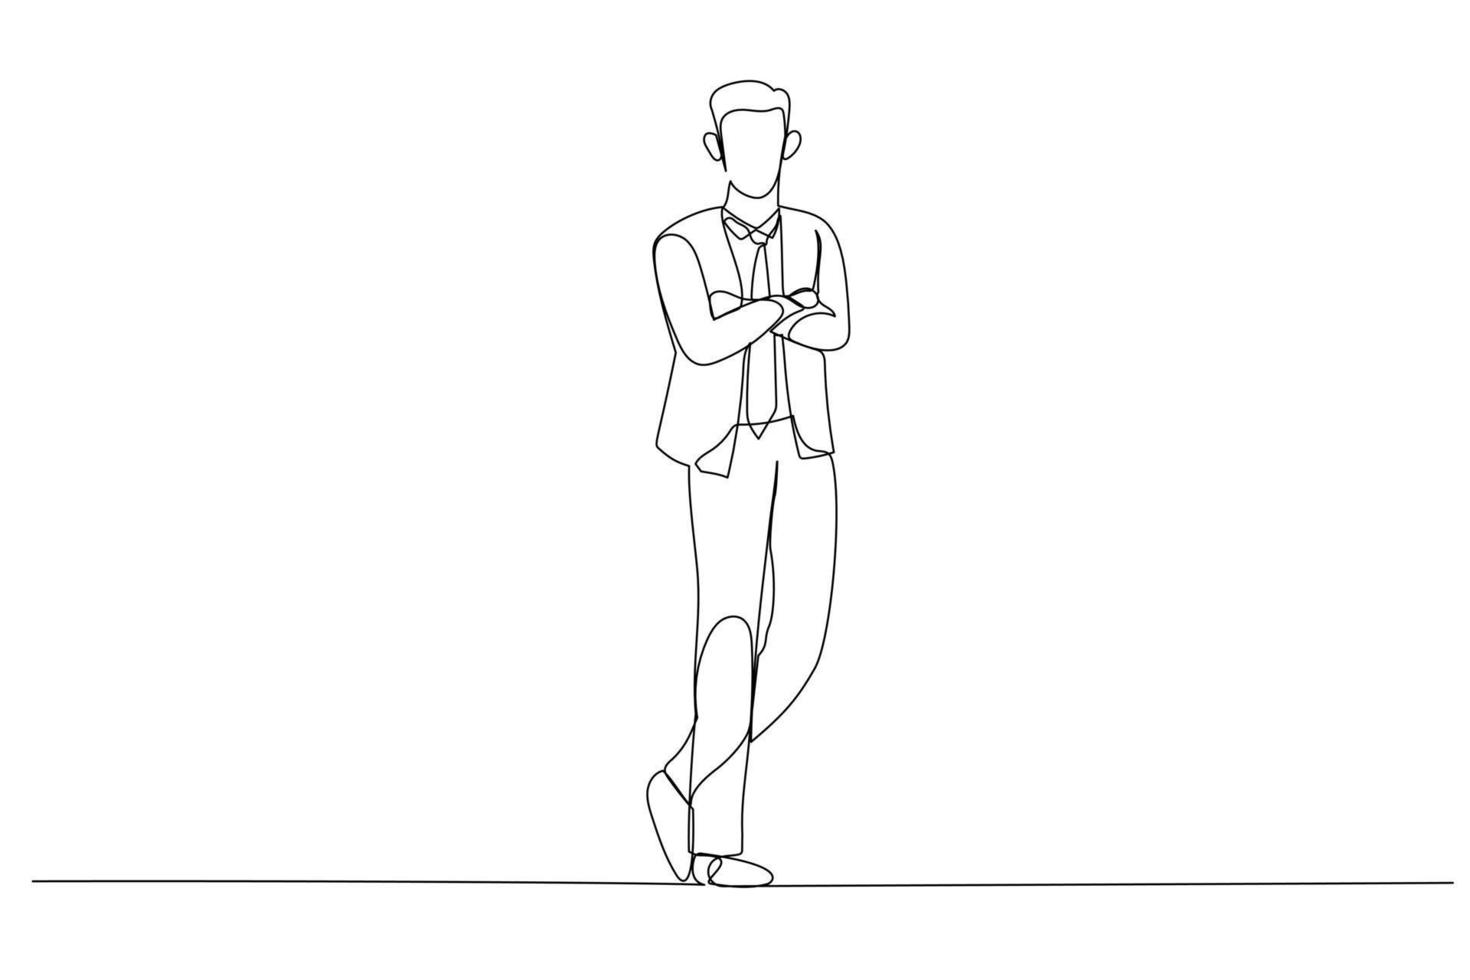 Drawing of ambitious businesswoman about to climb up ladder to overcome giant hand stopping him. Metaphor for overcome business obstacle, barrier or difficulty. Single continuous line art style vector